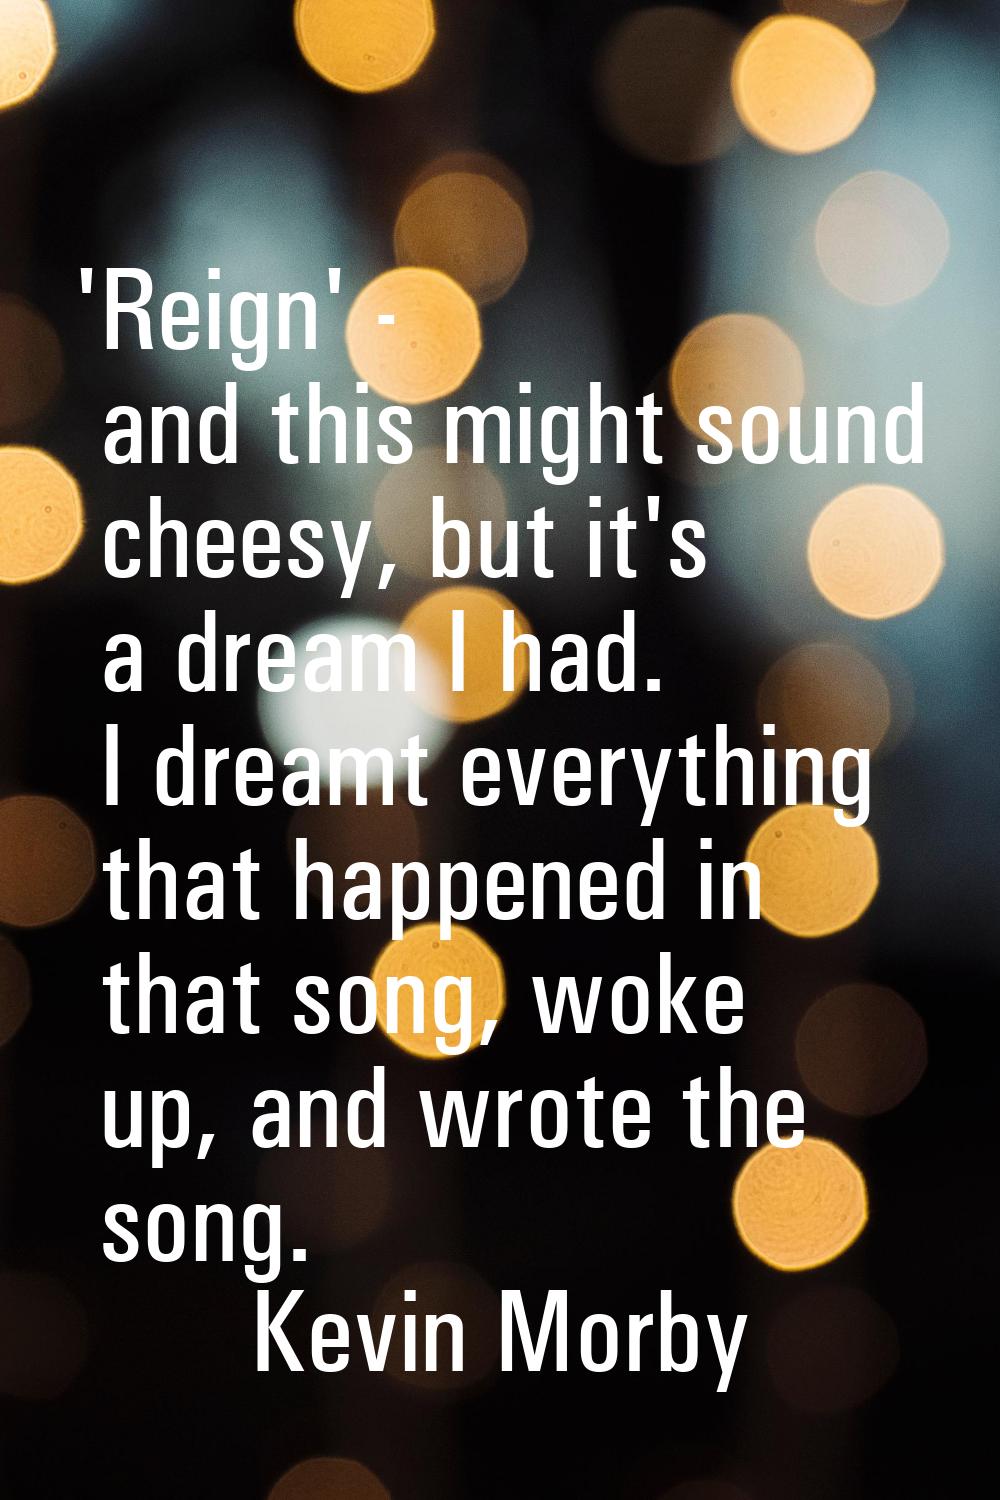 'Reign' - and this might sound cheesy, but it's a dream I had. I dreamt everything that happened in